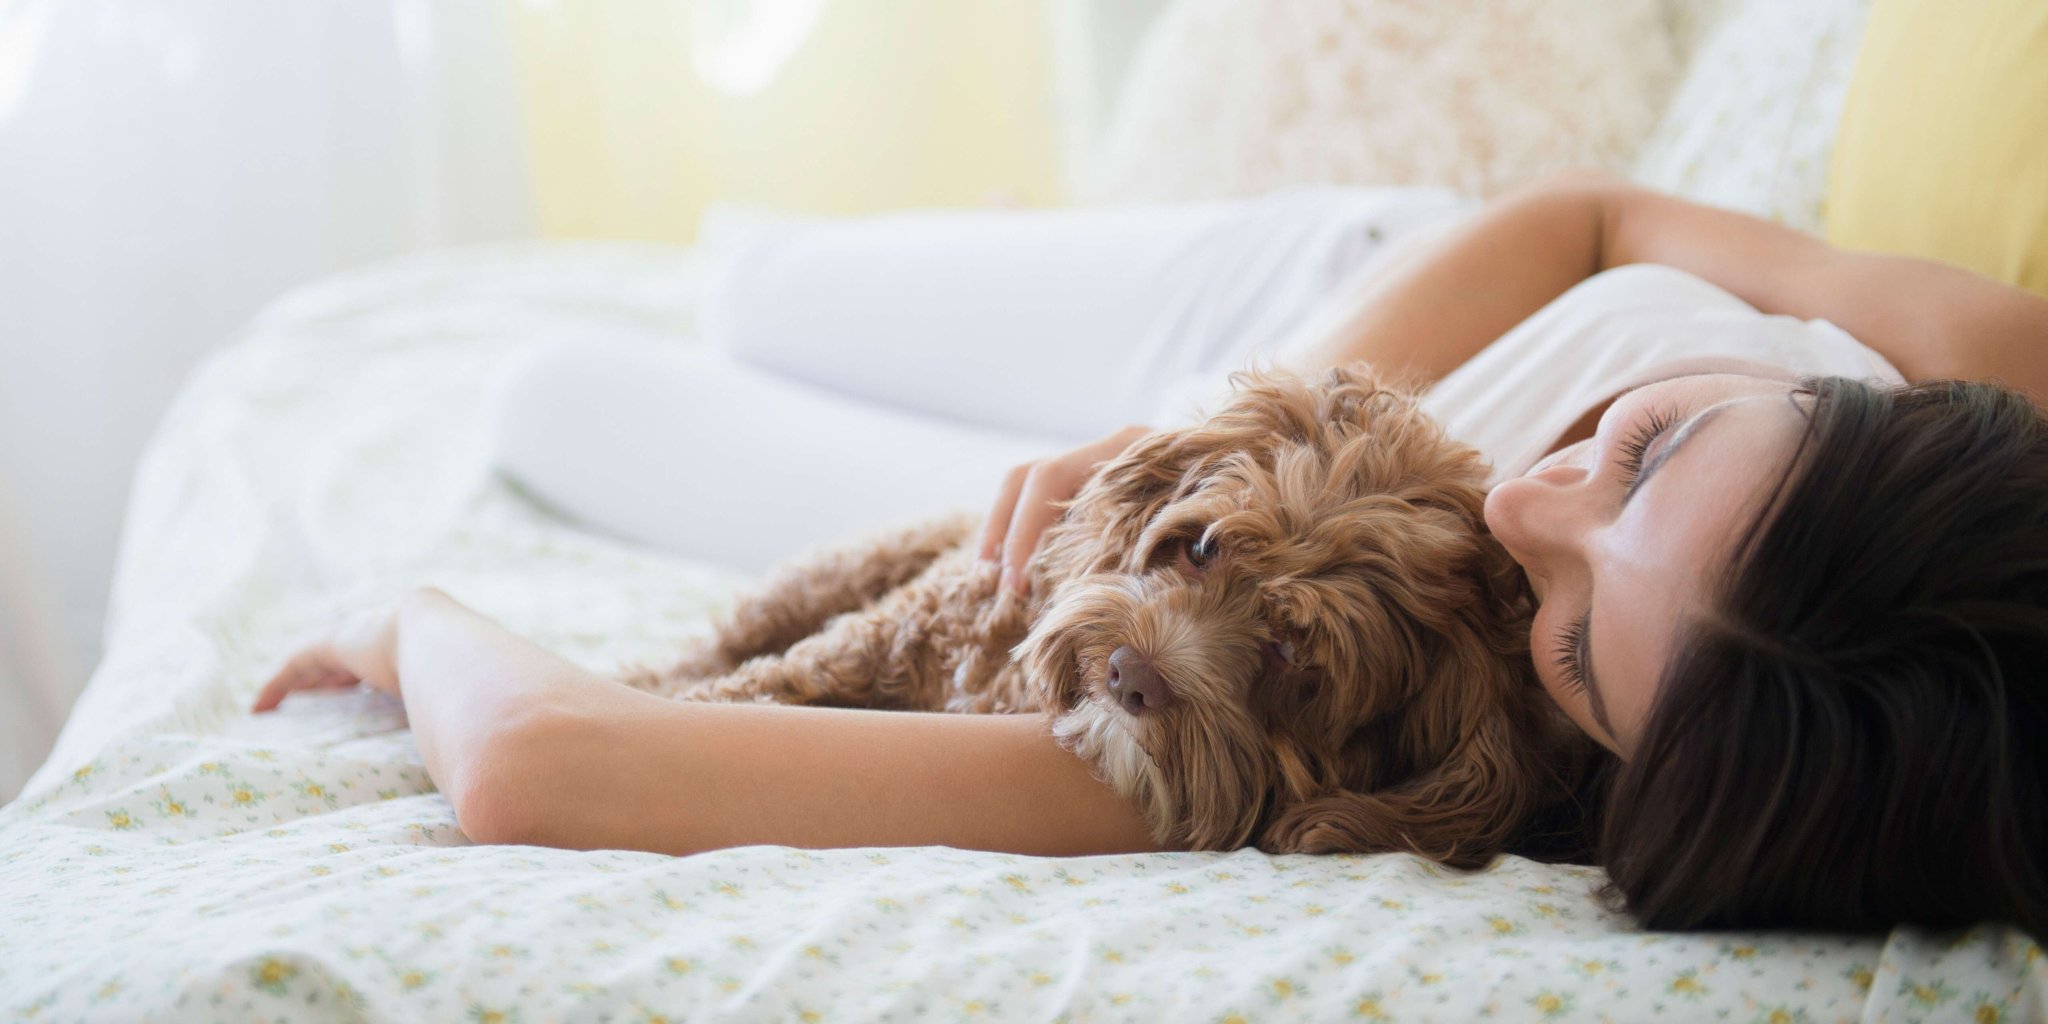 Sleeping With the Dog Is Better Than Sleeping With a Partner for Most Women